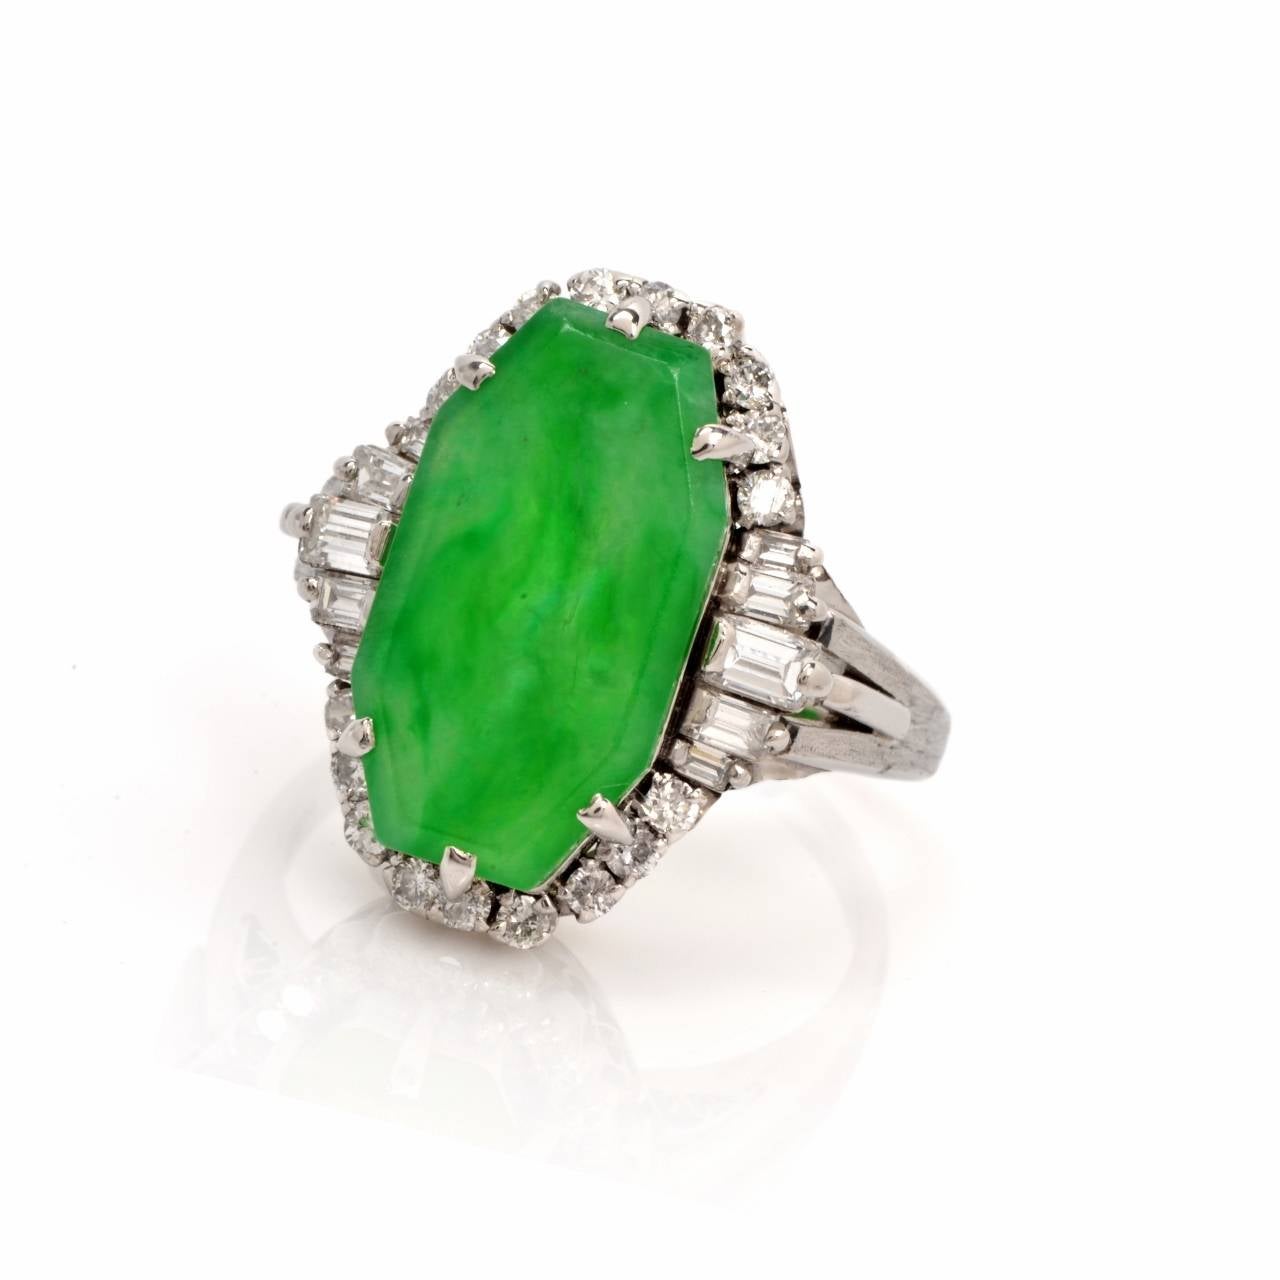 This captivating estate cocktail ring of enchanting aesthetic is crafted in solid platinum, weighing 11.29 grams. Incorporating a color-contrasted octagonal plaque, it is centered with a GIA certified octagonal-carved natural (untreated) green